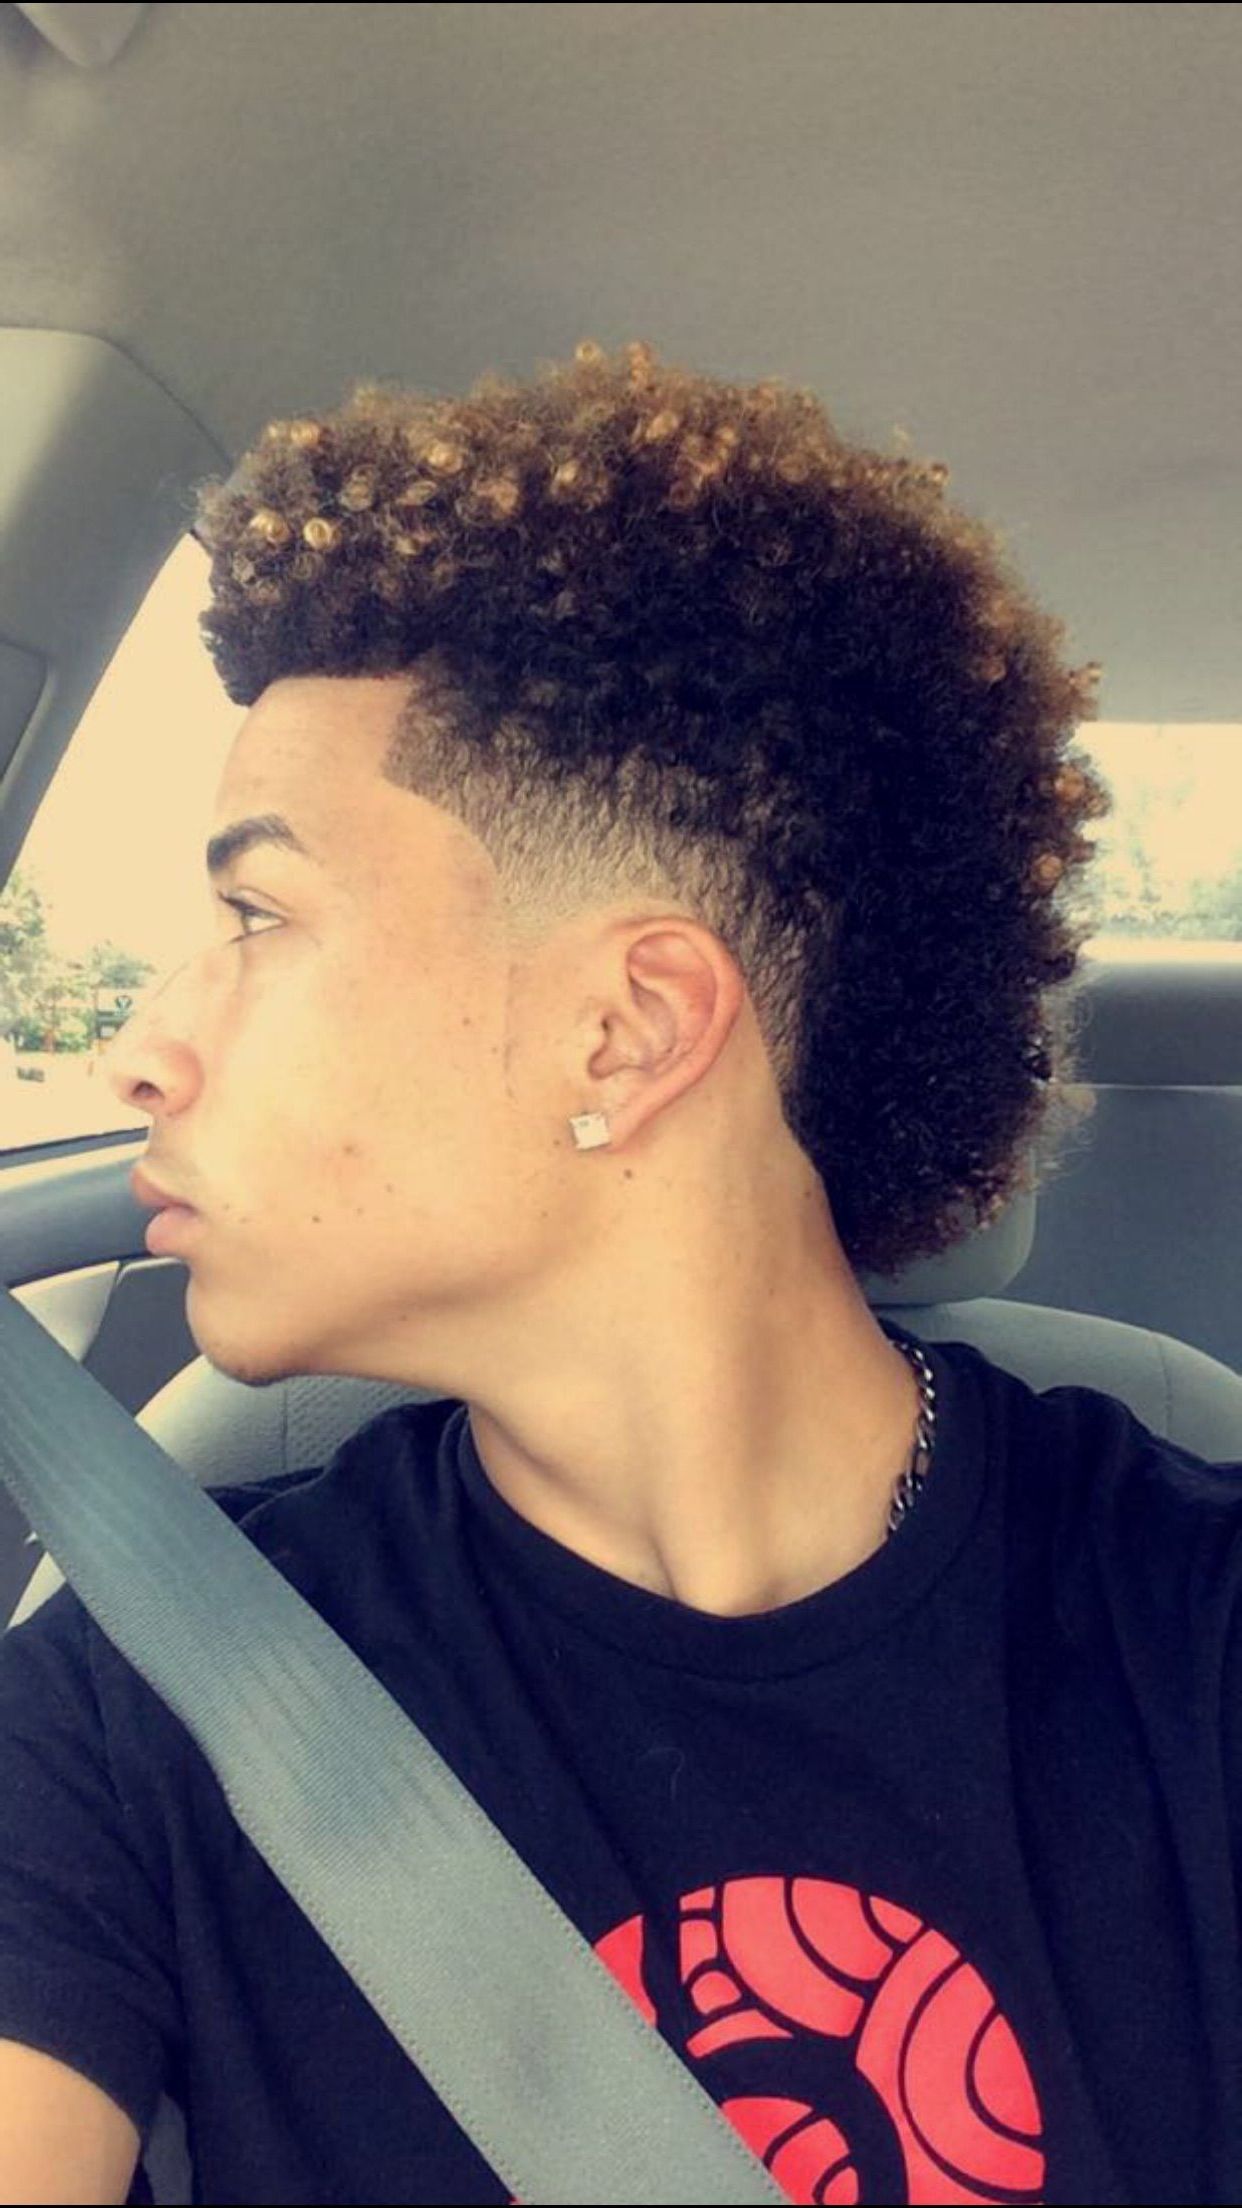 Haircut #hairstyle #mohawk #fade #lightskin #bleach #men In Well Liked Curly Highlighted Mohawk Hairstyles (View 3 of 20)